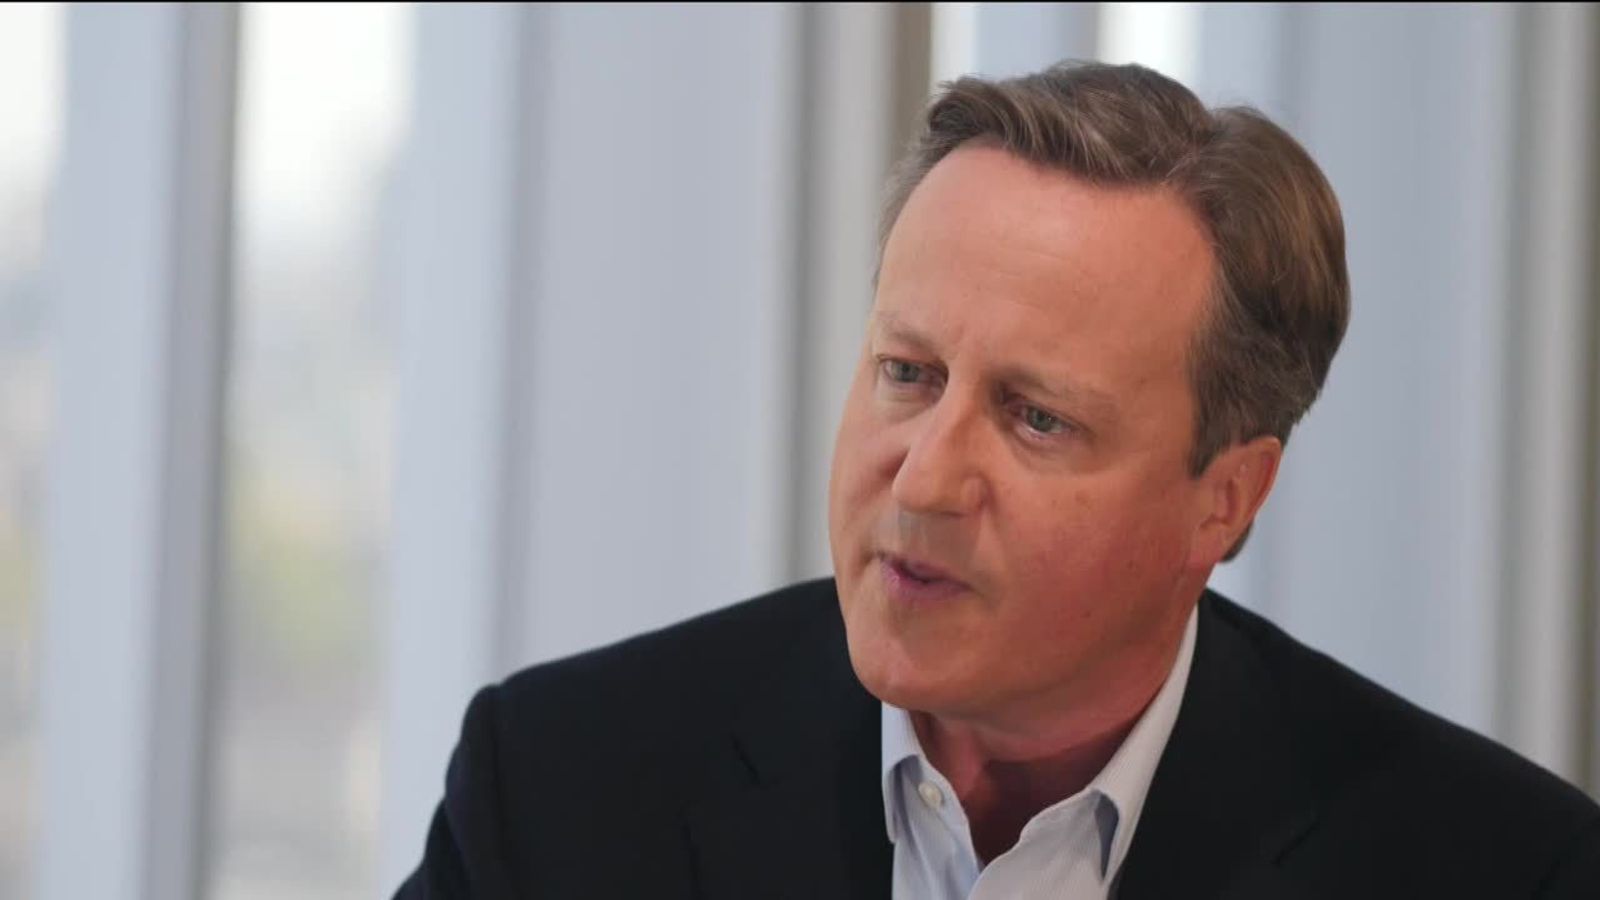 David Cameron On Police Cuts We Made Difficult Decisions News Uk Video News Sky News